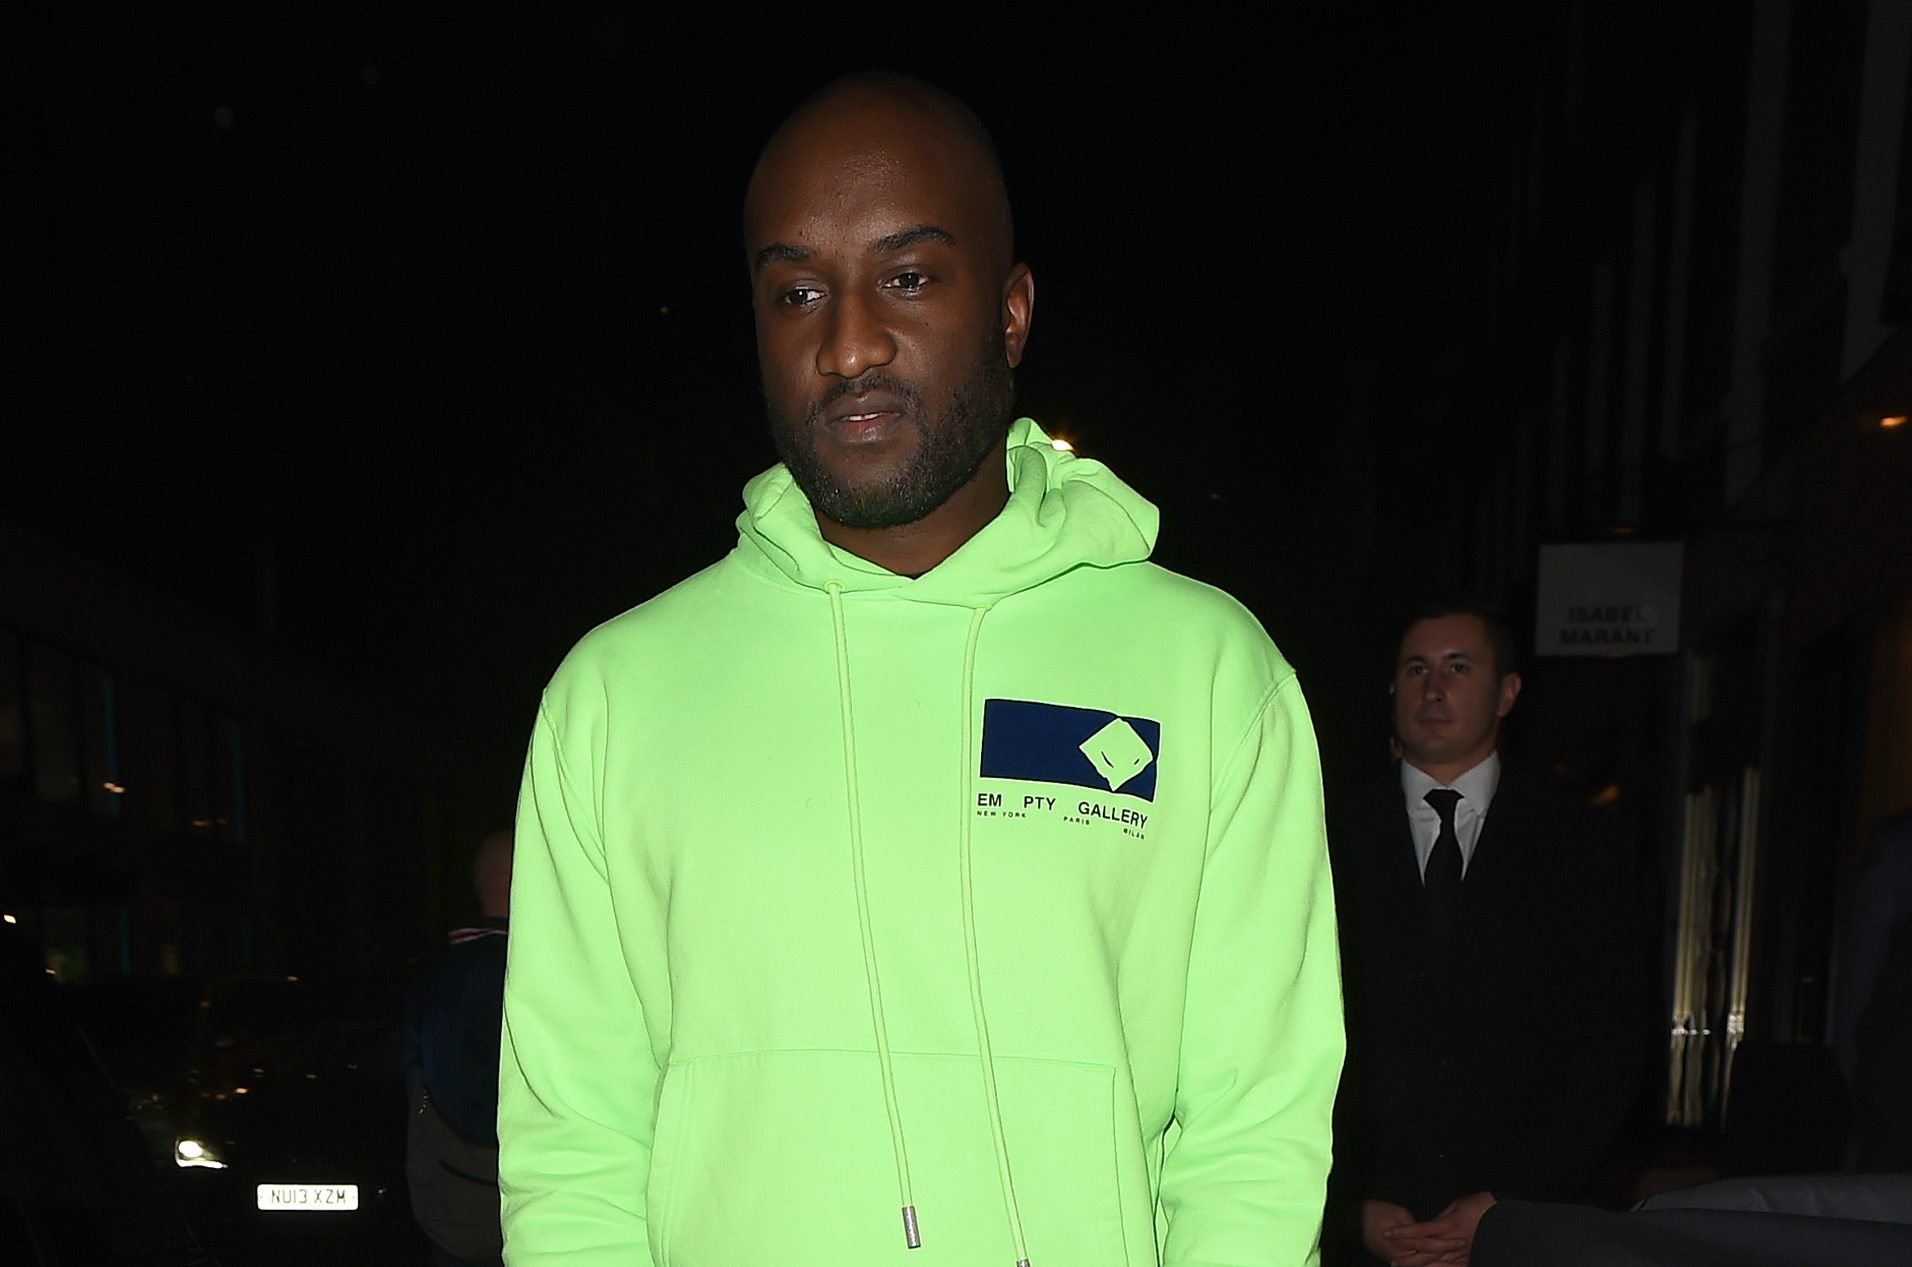 Rita Ora enjoys a night out with Louis Vuitton artistic director Virgil Abloh and her sister Elena Ora